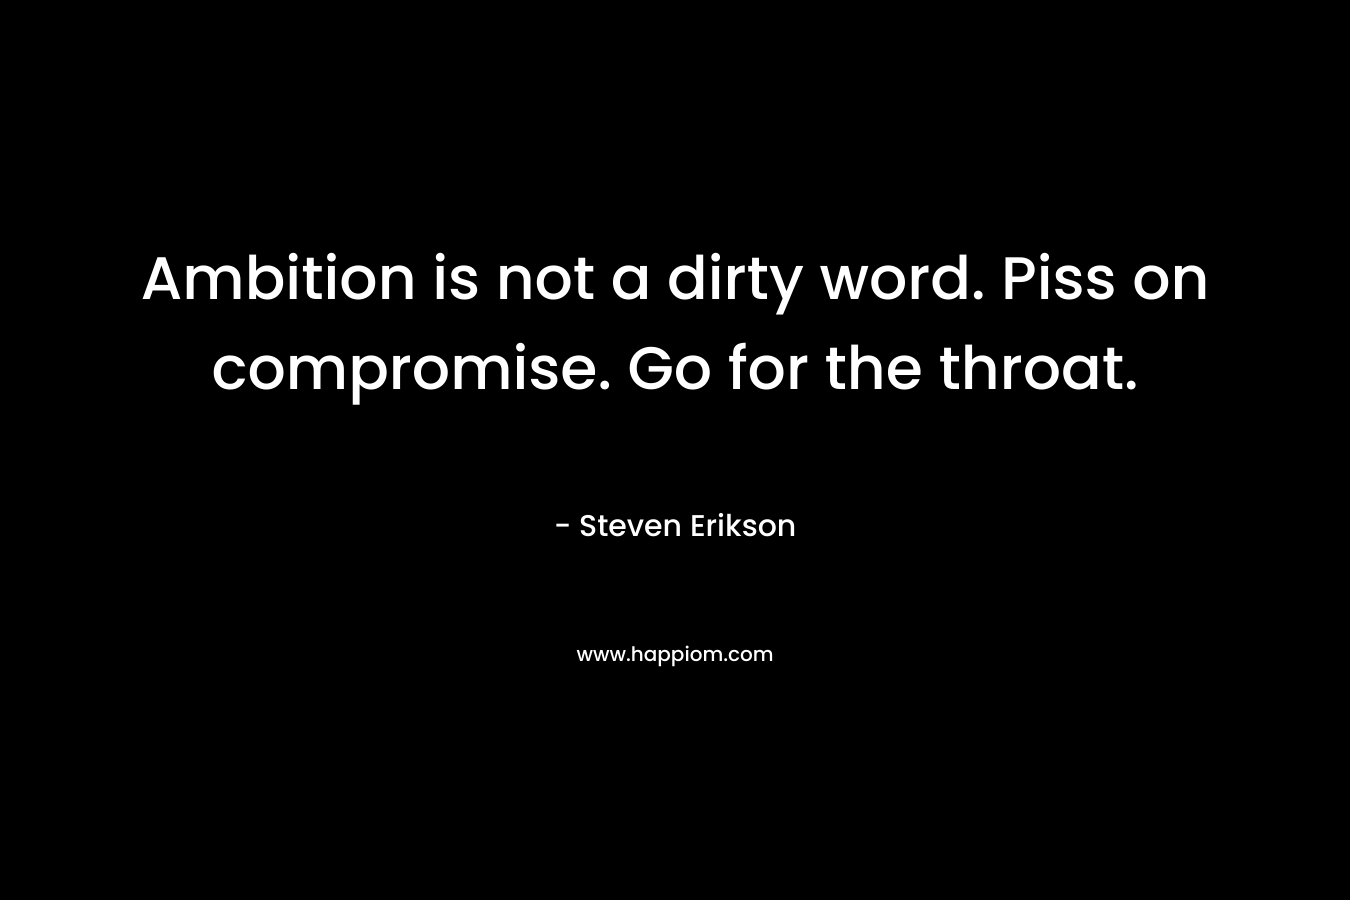 Ambition is not a dirty word. Piss on compromise. Go for the throat. – Steven Erikson